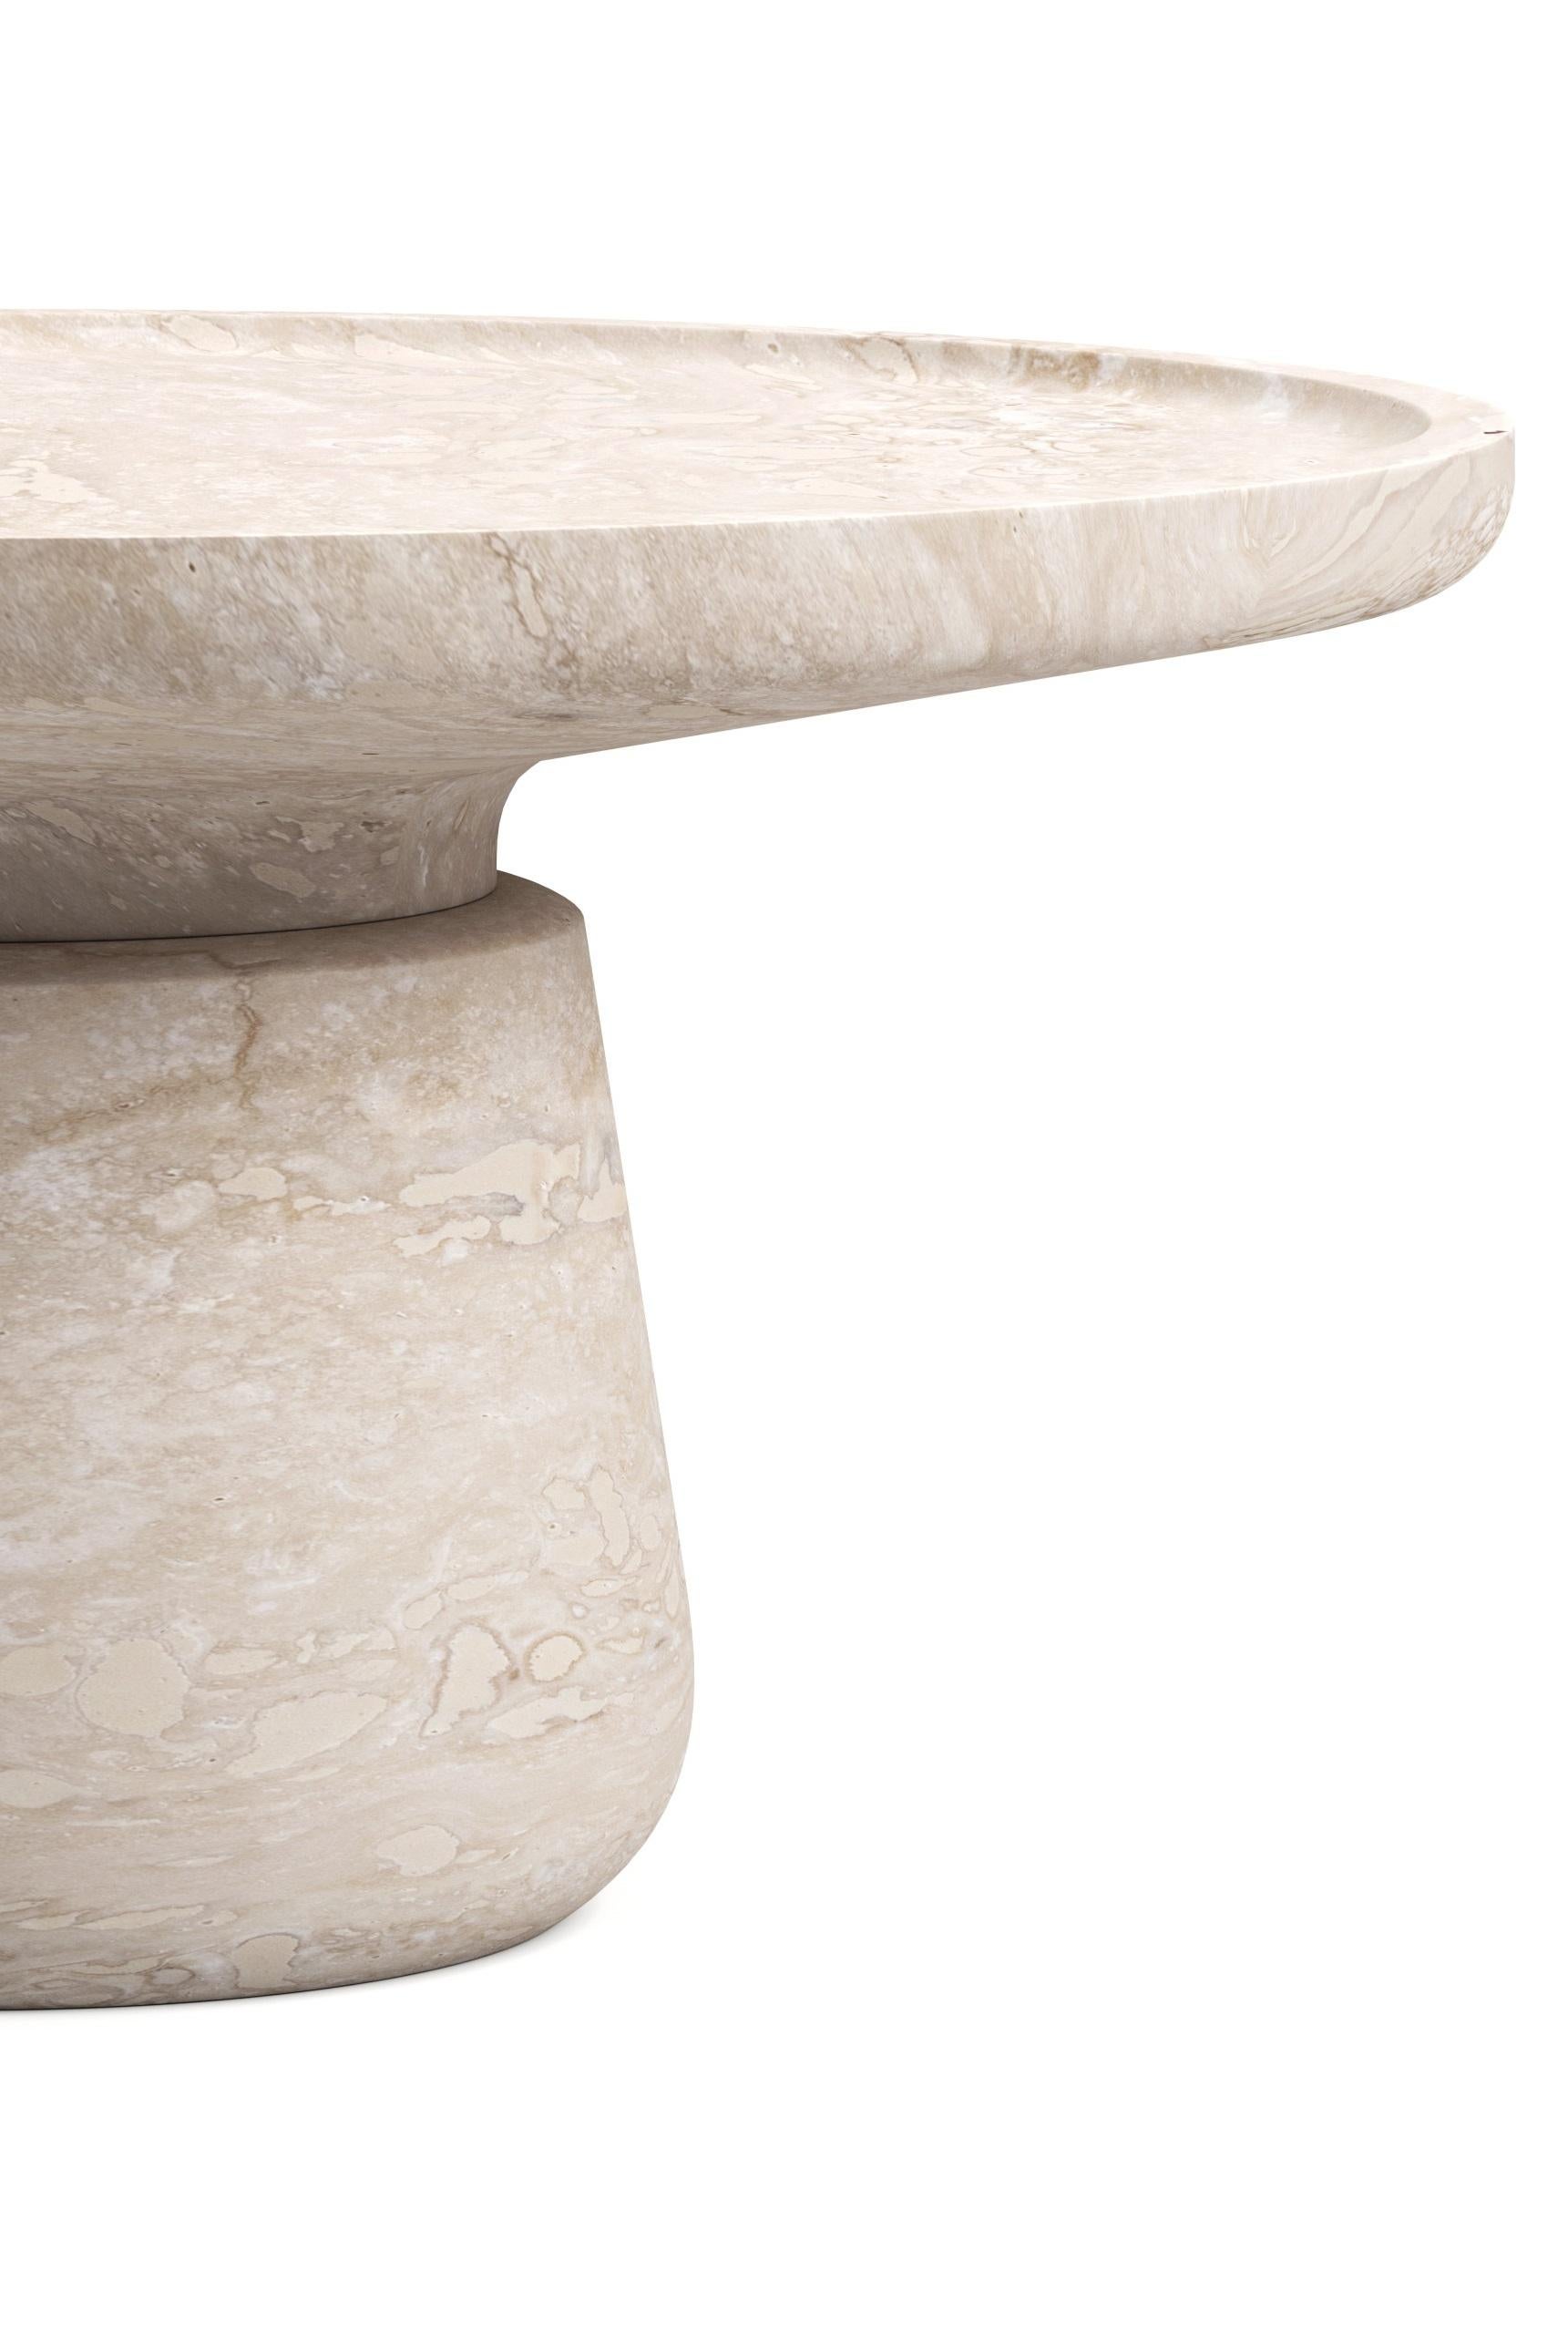 Altana Large Side Table by Ivan Colominas
Dimensions: Ø 75 x H 36 cm
Materials: Travertino marble.

Available in different marble options and in different sizes. Please contact us.

Like the turret-like rooftop terraces we find in Renaissance homes,